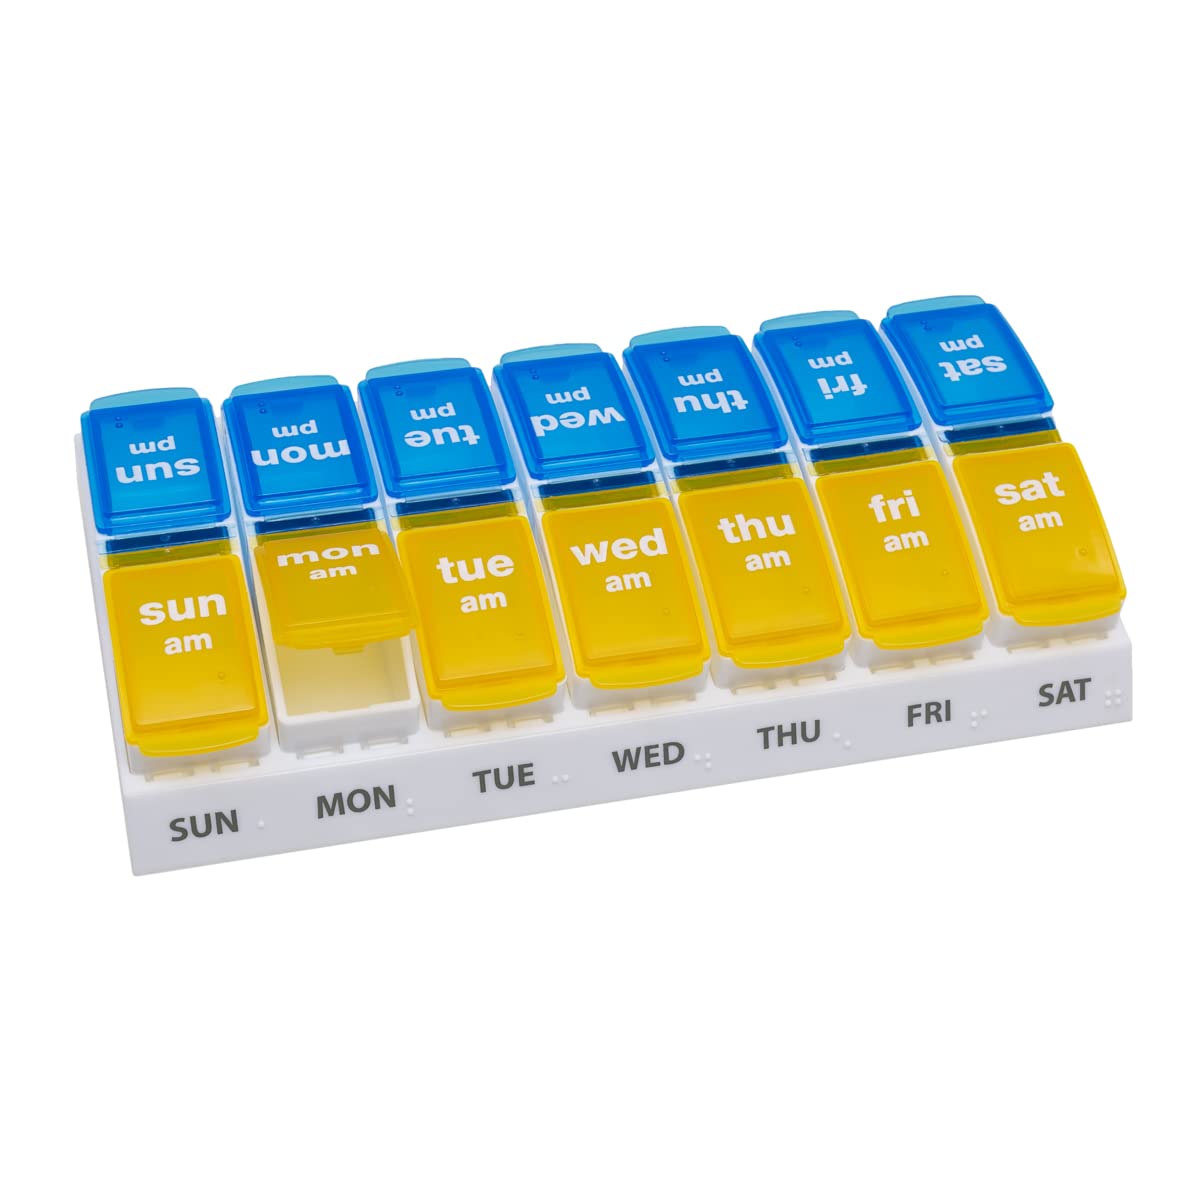 EZY DOSE Weekly (7-Day) AM/PM Pill Case, Medicine Planner, Vitamin Organizer, Large Pop-Out Compartments, 2 Times a Day, Blue and Yellow Lids